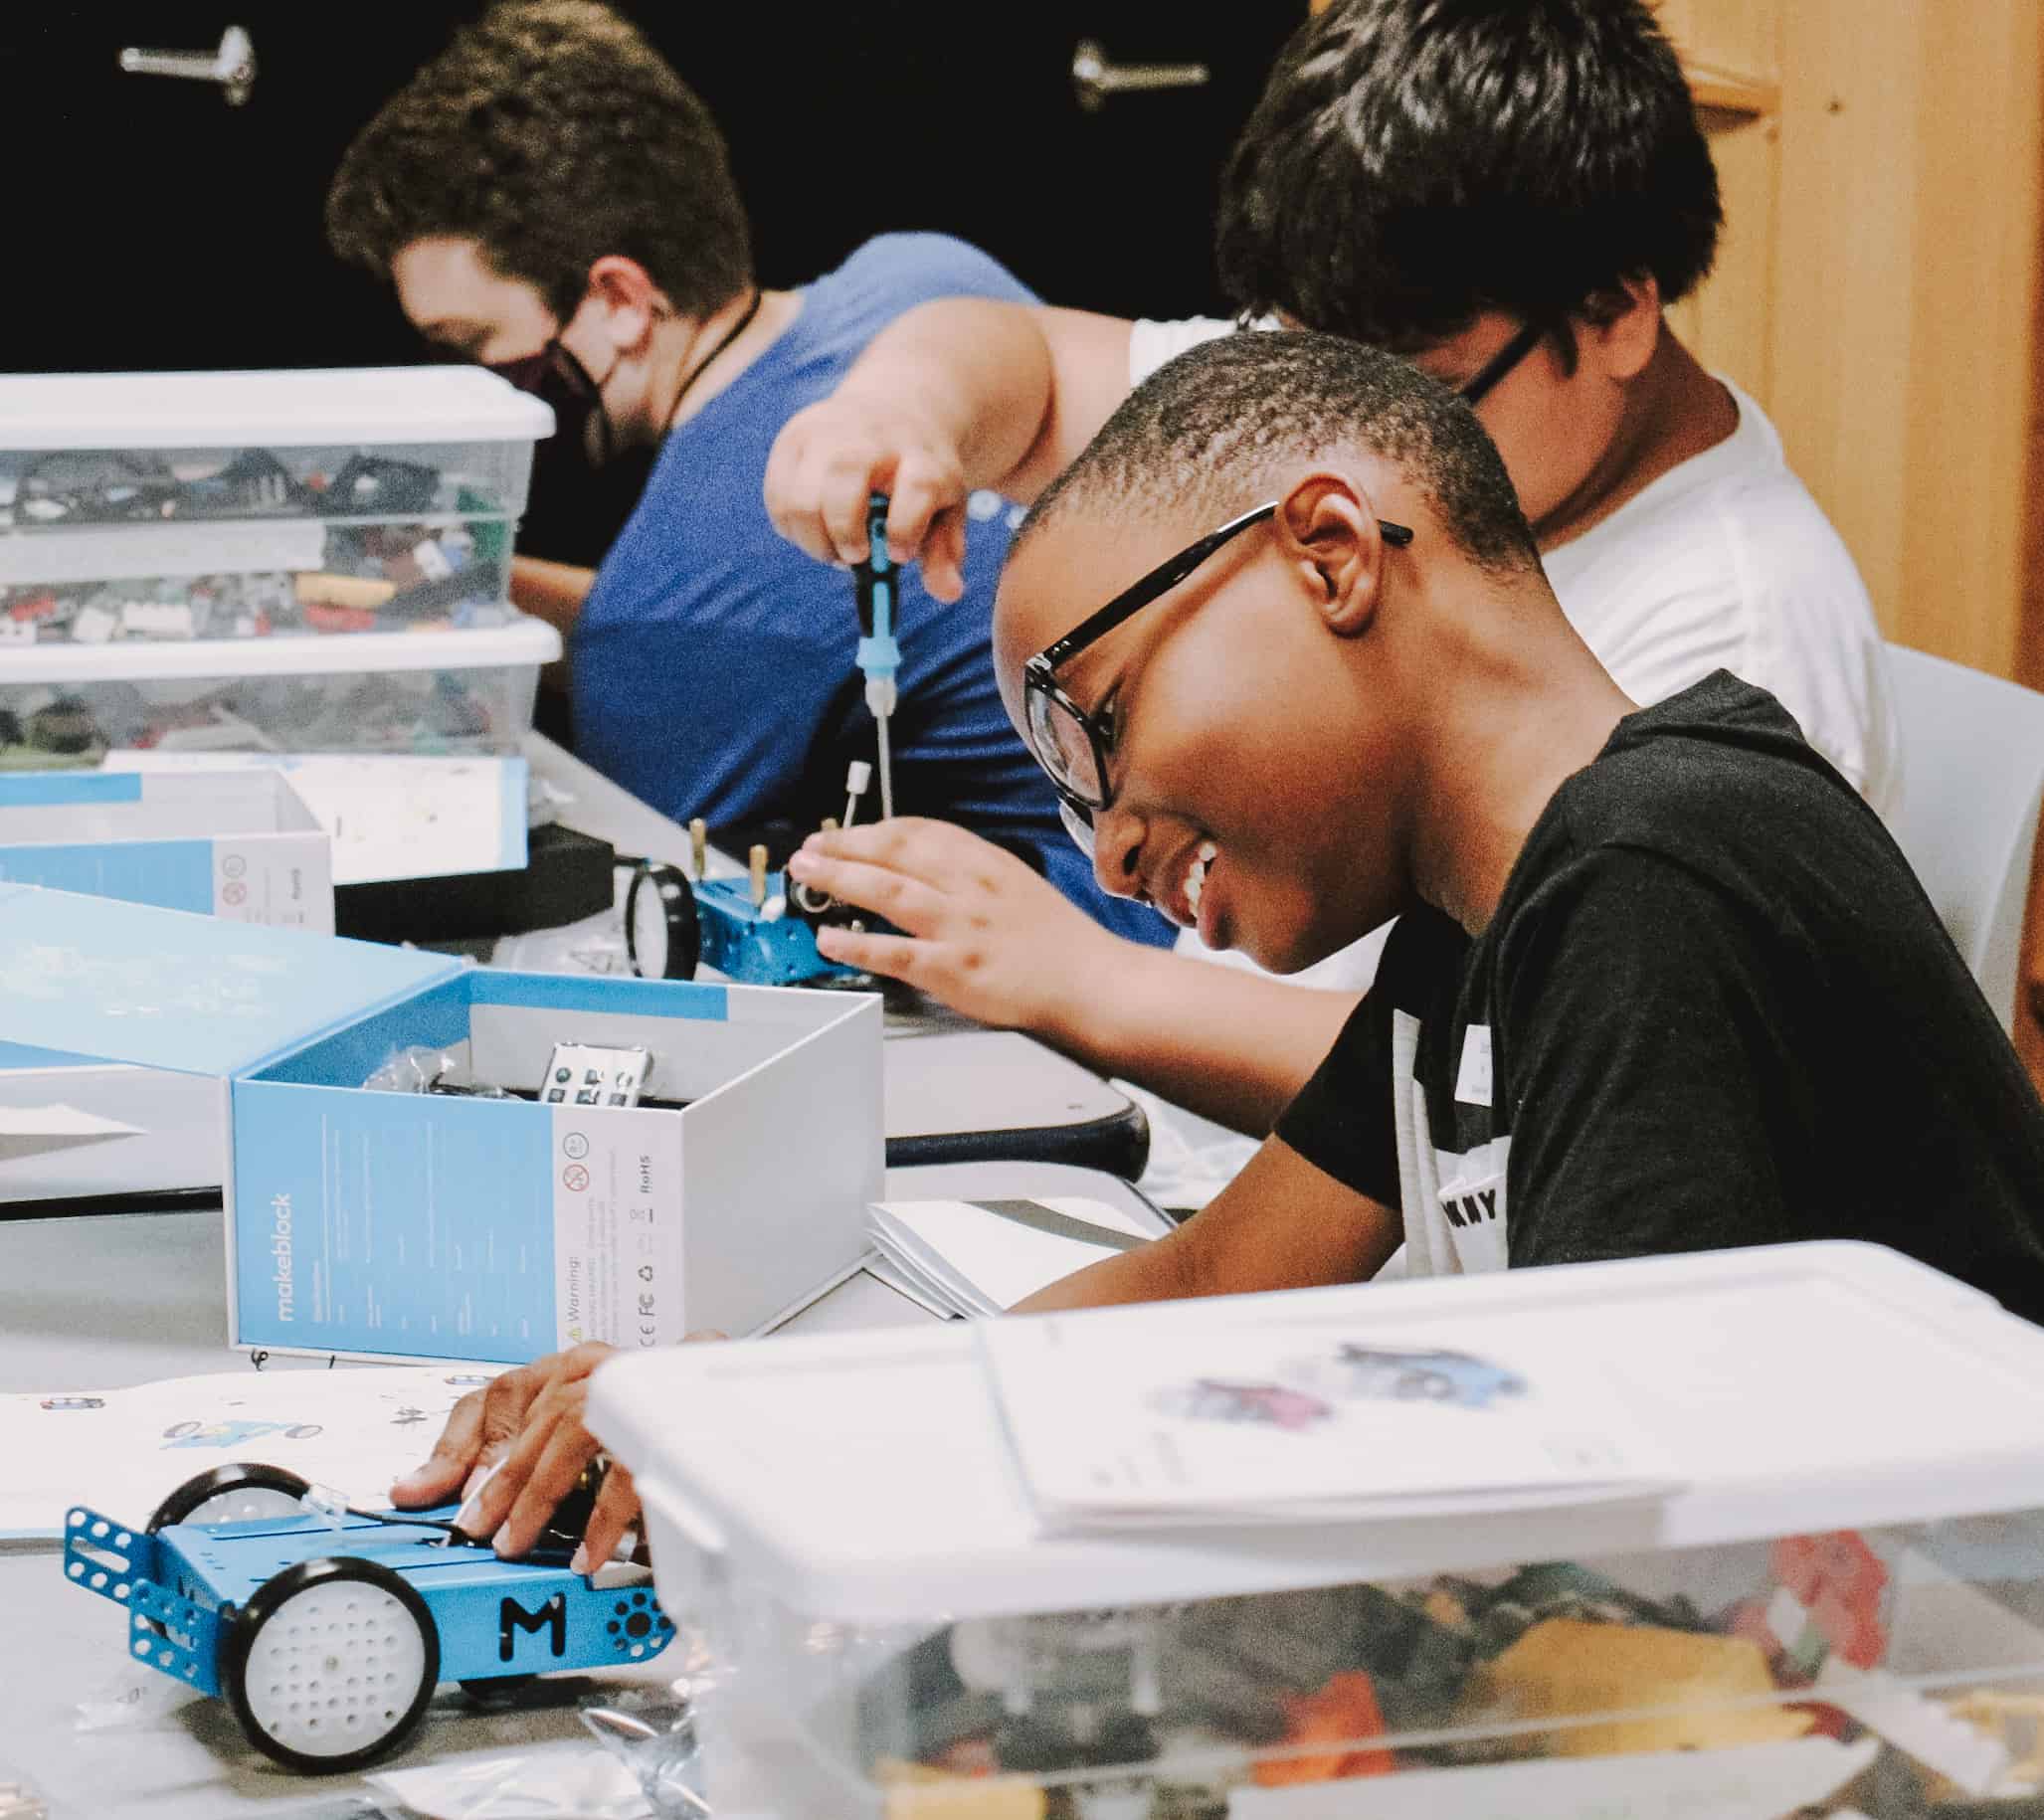 You are currently viewing Sr. LEGO® Robot Engineering Camp for ages 9 to 14 | Full Day | Upper Arlington